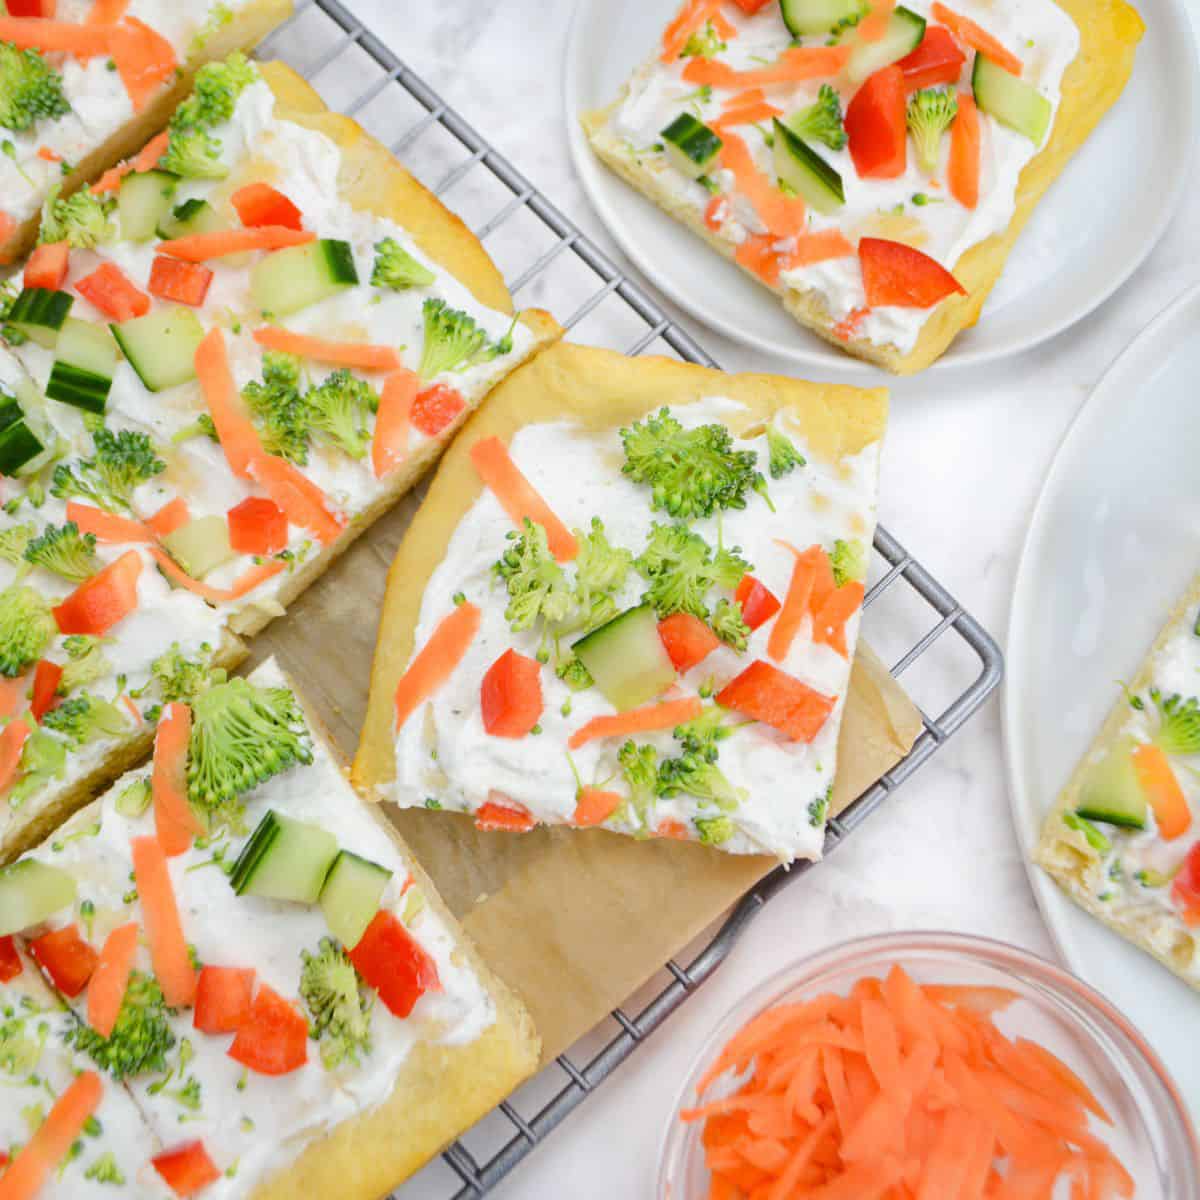 Veggie pizza cut into slices sits on top of a cooling rack lined with parchment. Two small plates with slices surround it and a small bowl of shredded carrots.